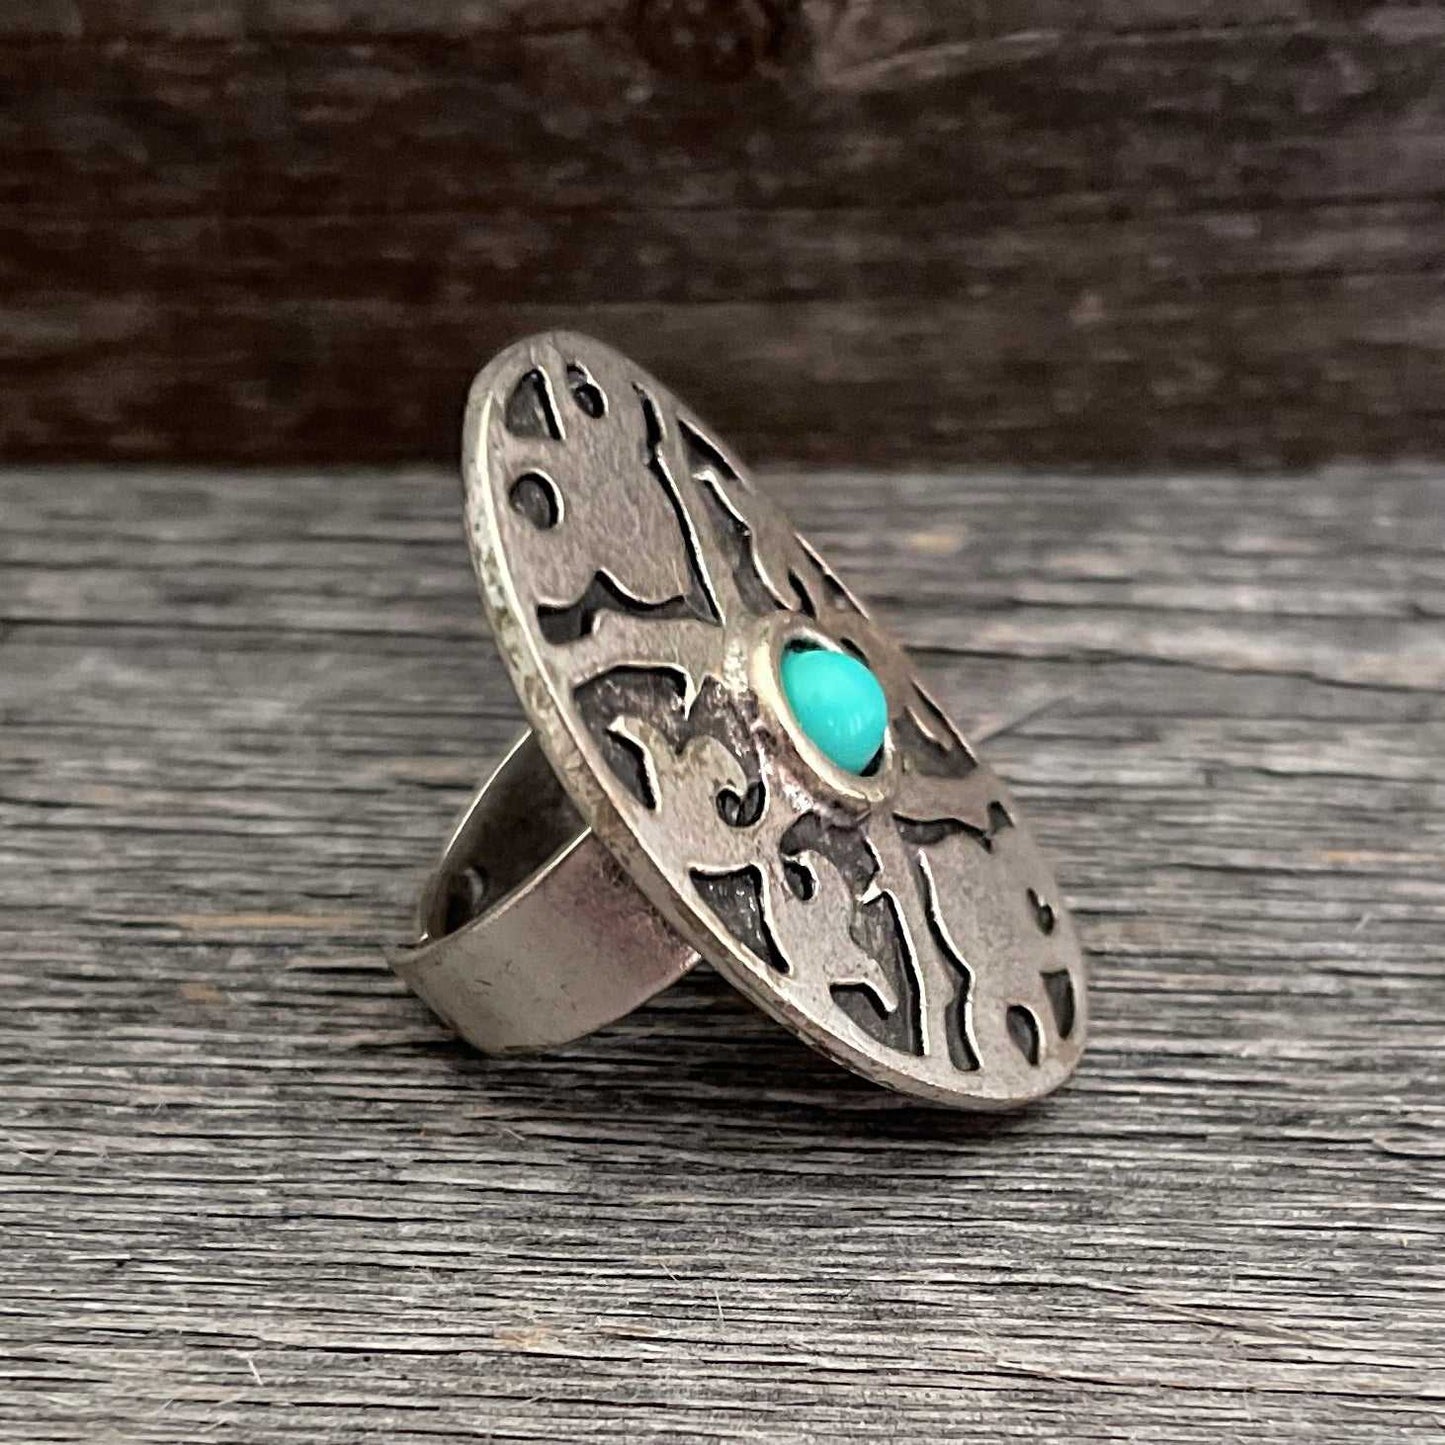 Oval and turquoise stone ring